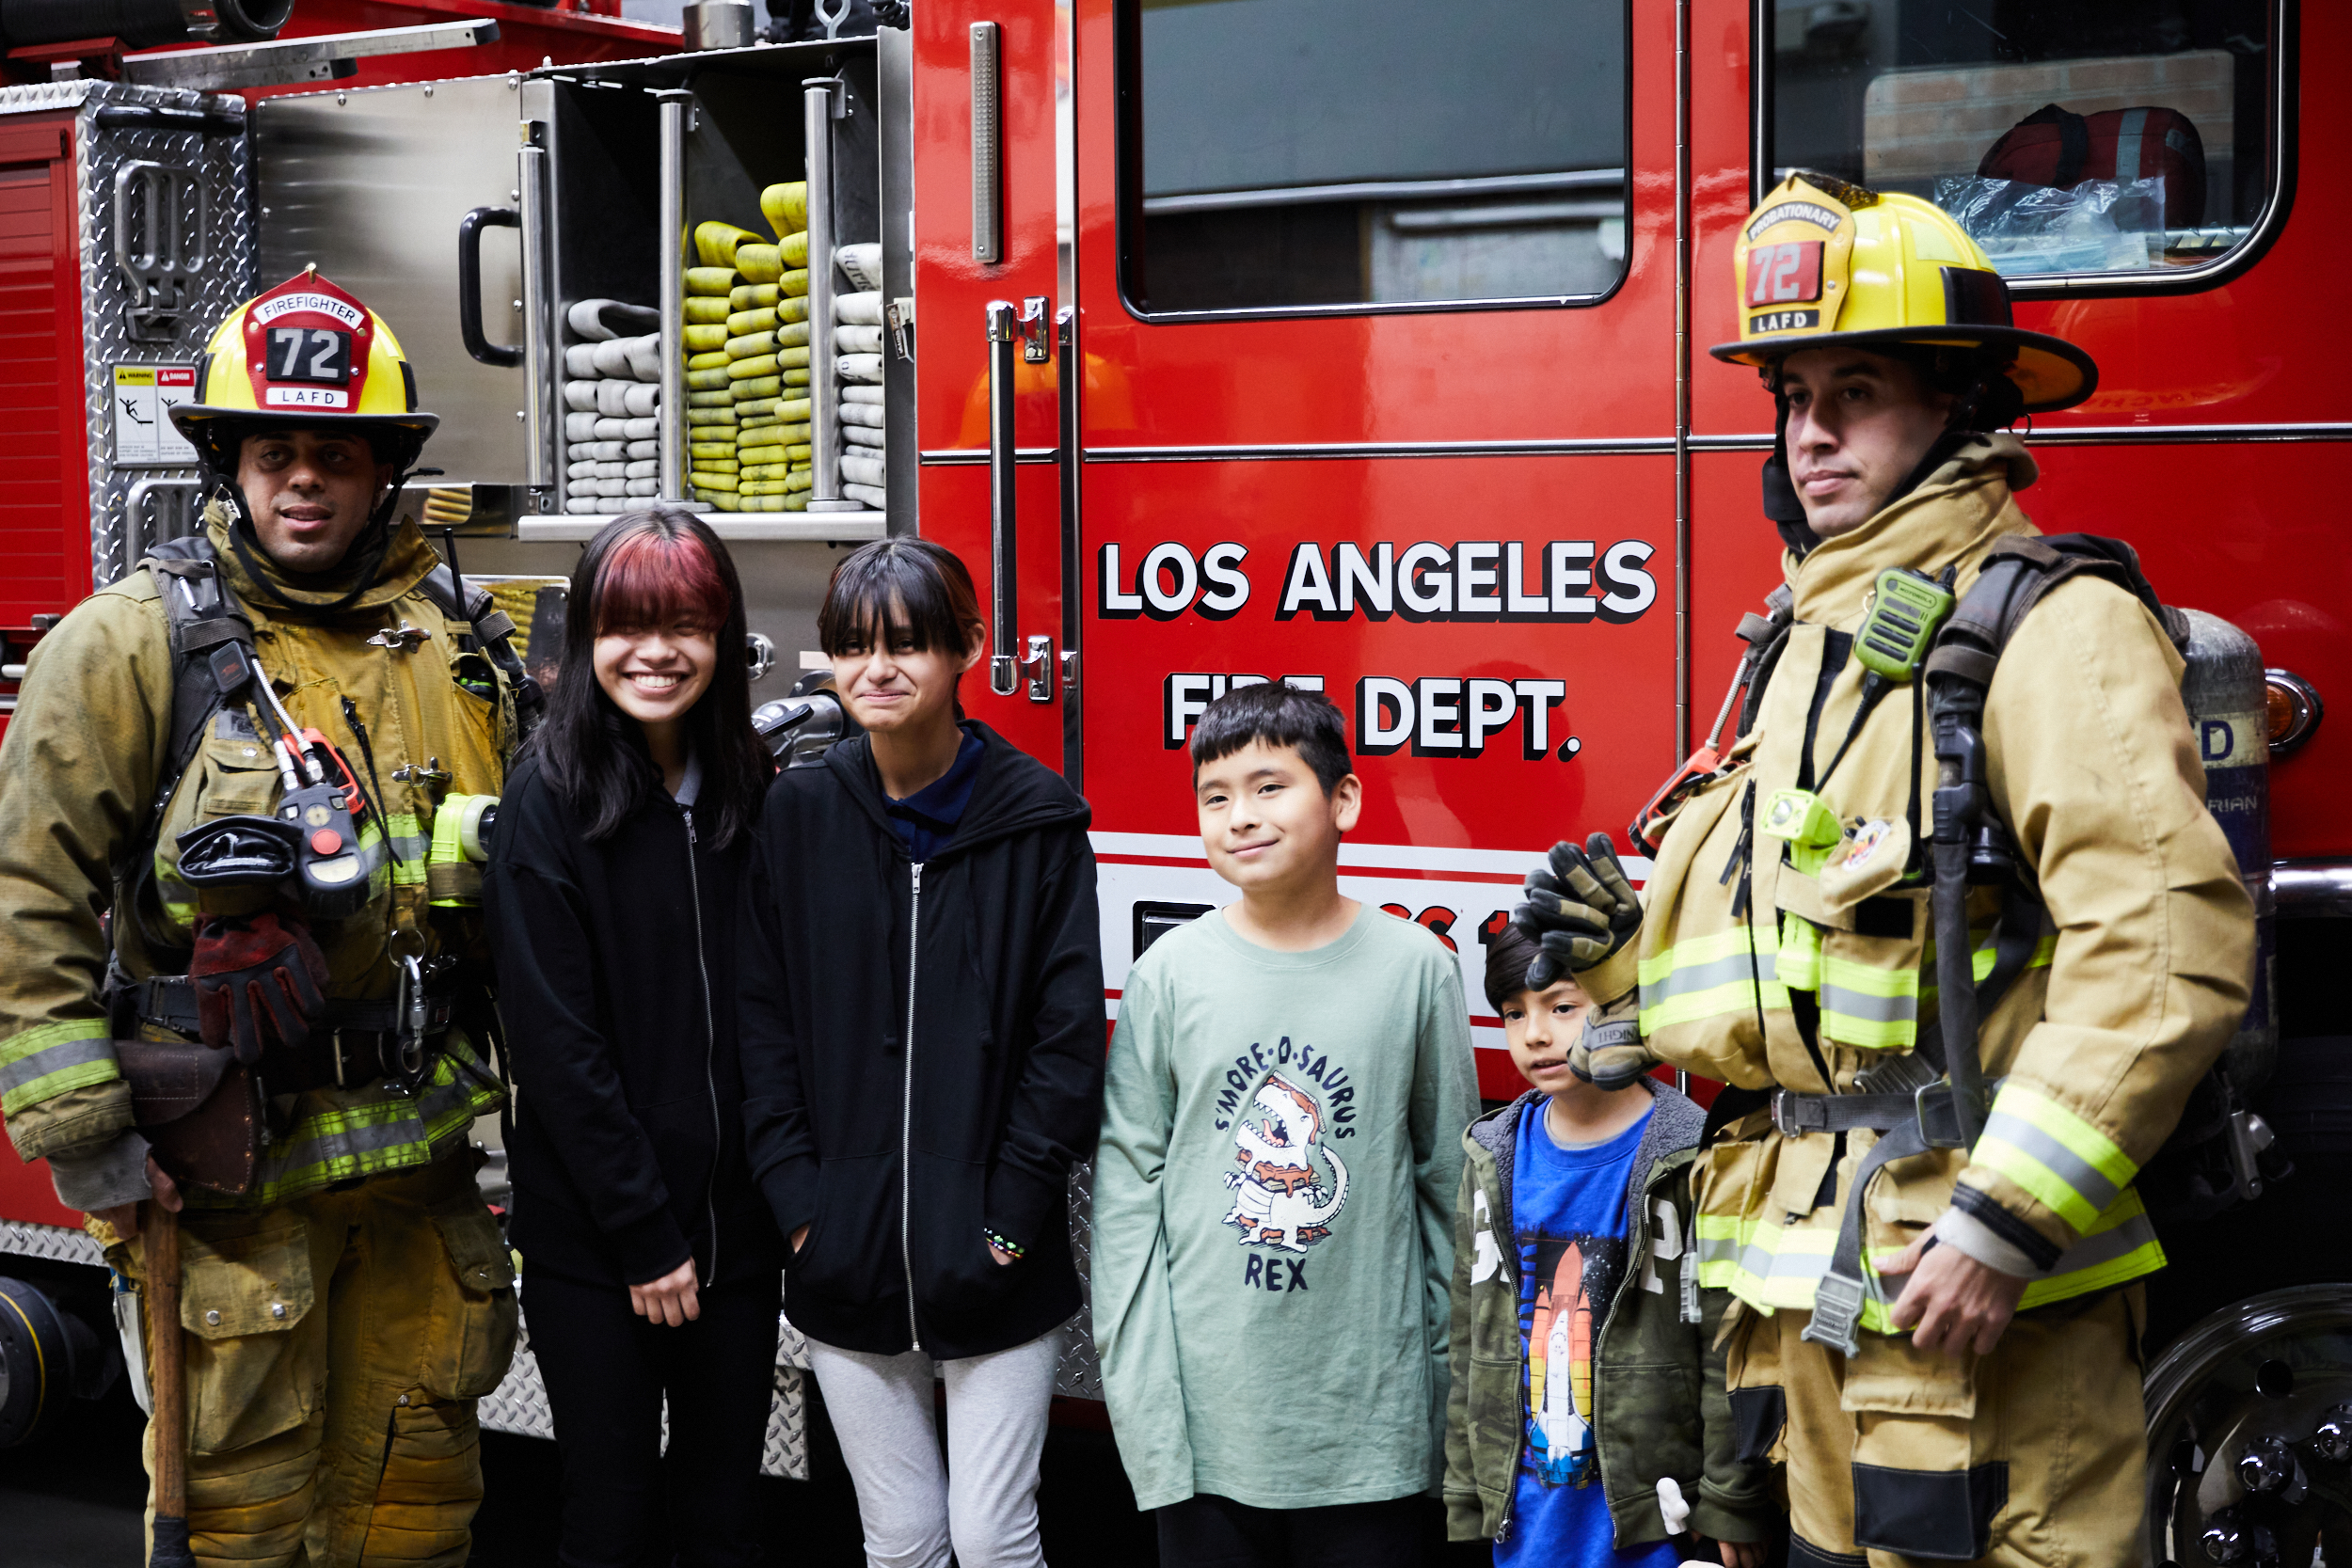 Two firefighters and the children in front of the fire engine